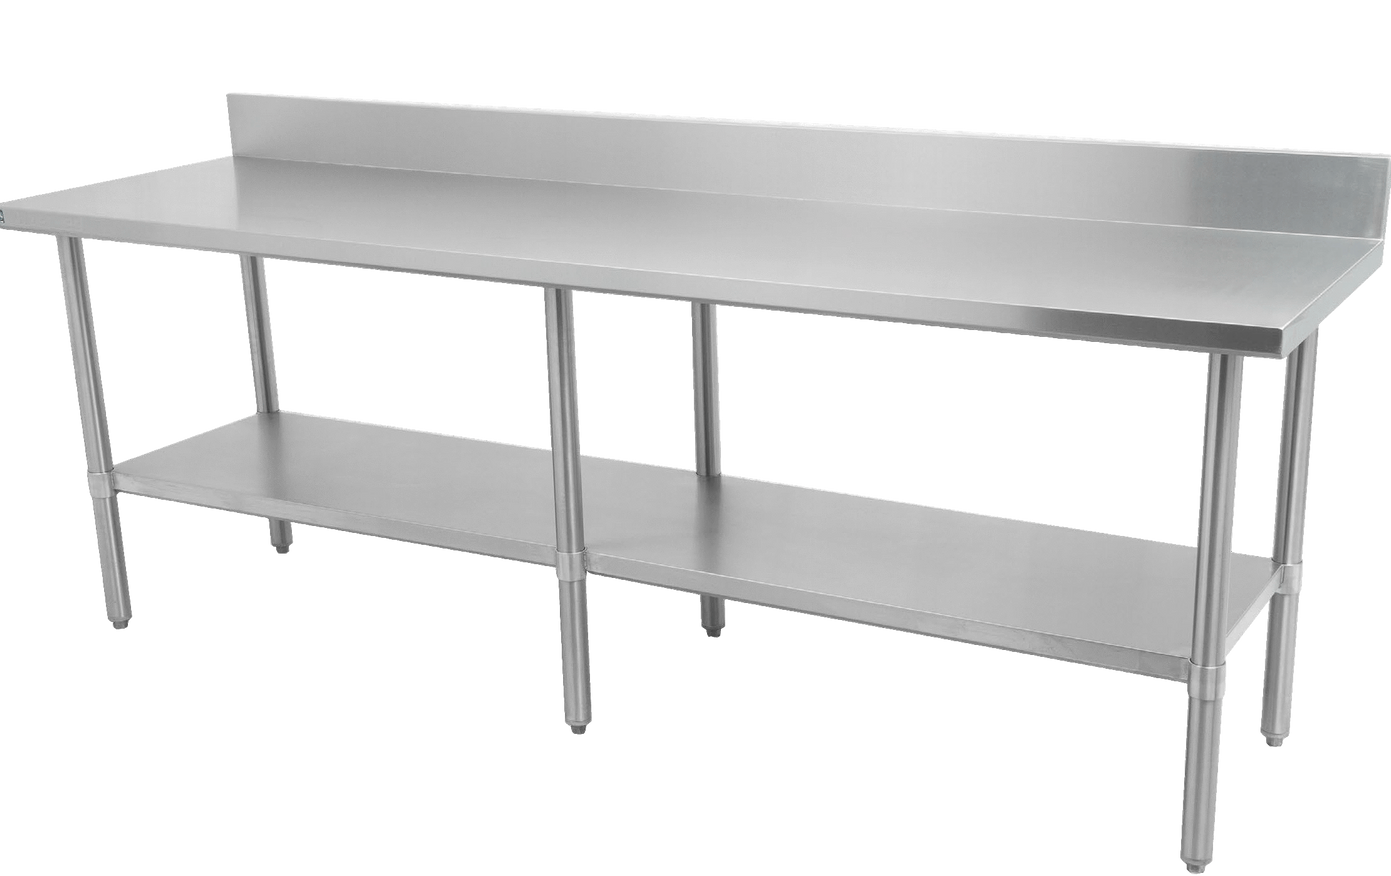 Thorinox DSST-3096-GS Table, 96"W x 30"D x 34"H, Stainless Steel Table with Galvanized Shelf